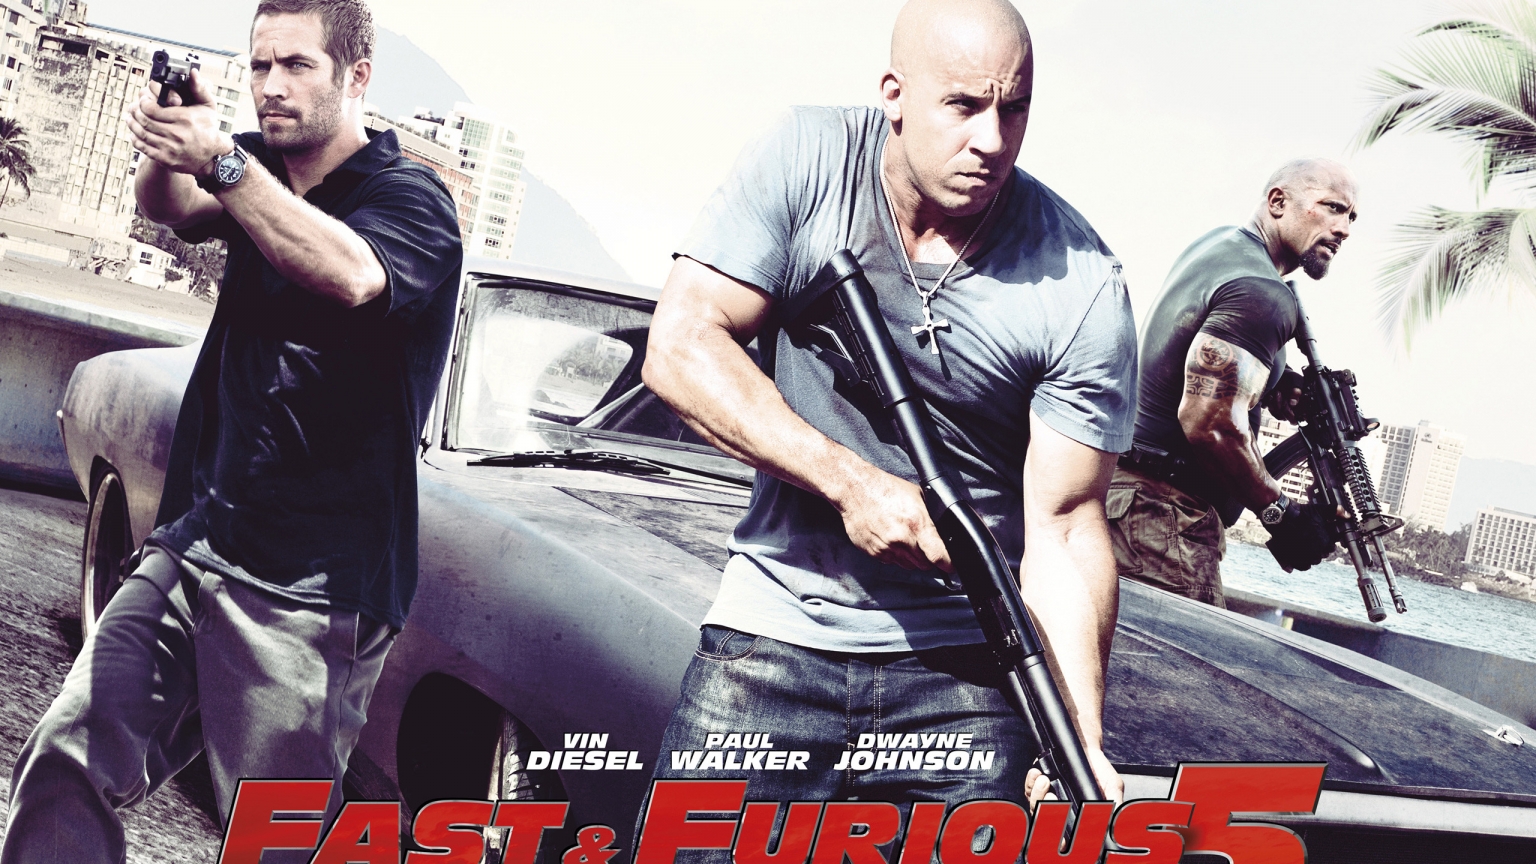 Fast and Furious 5 Movie for 1536 x 864 HDTV resolution